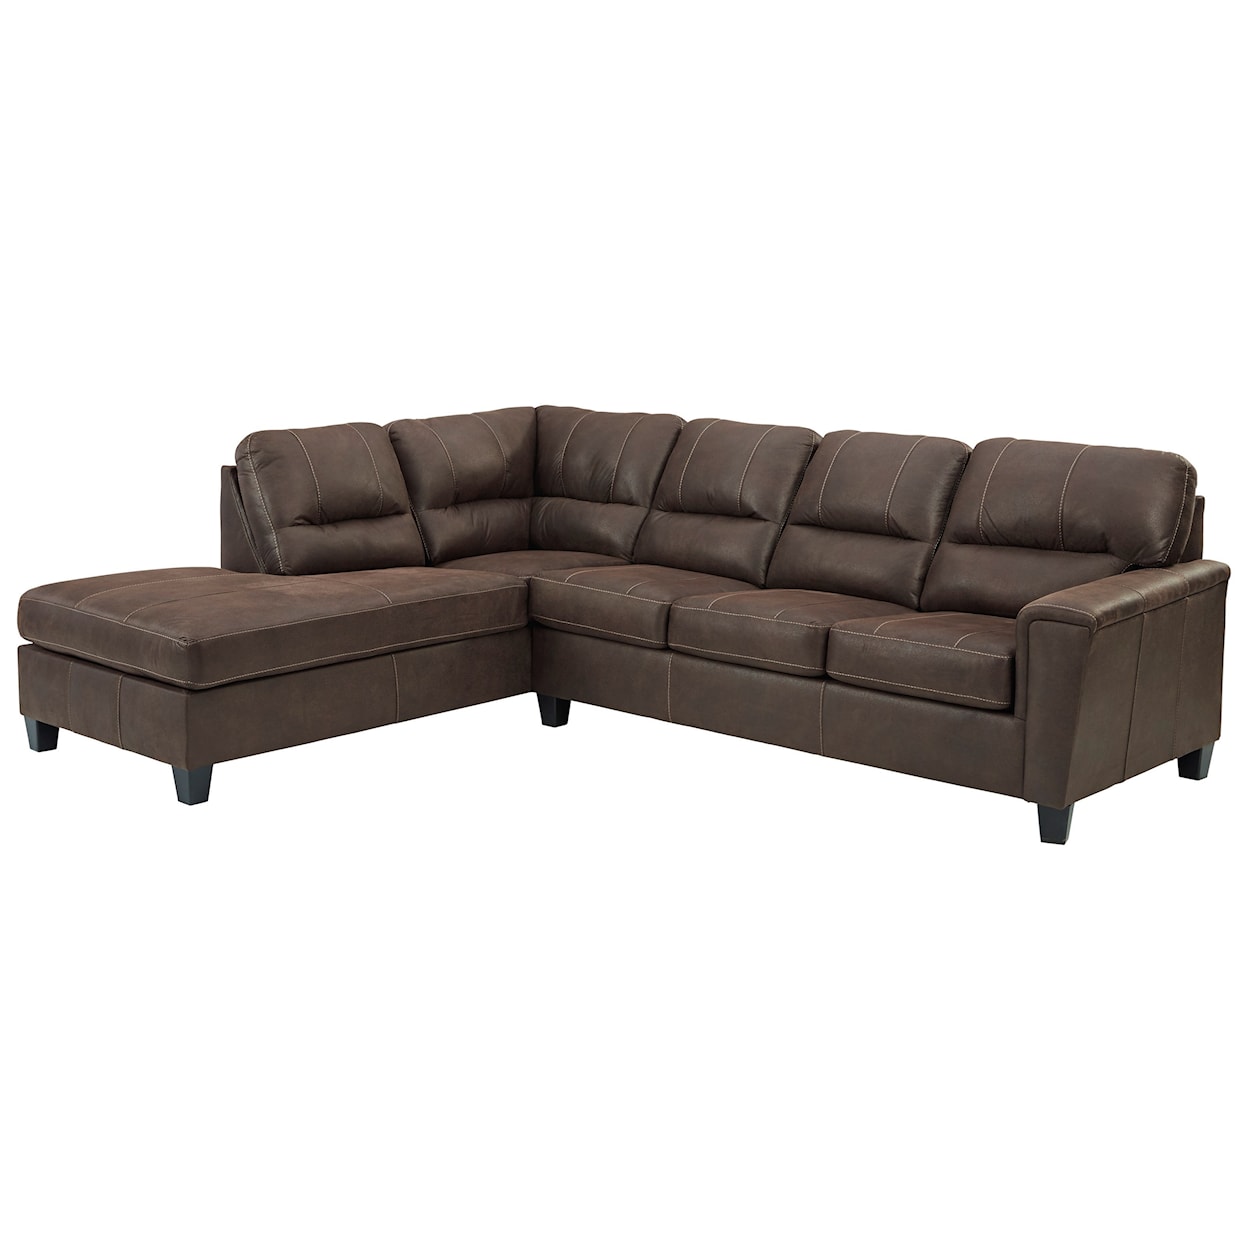 Signature Nash Chestnut 2-Piece Sectional with Left Chaise